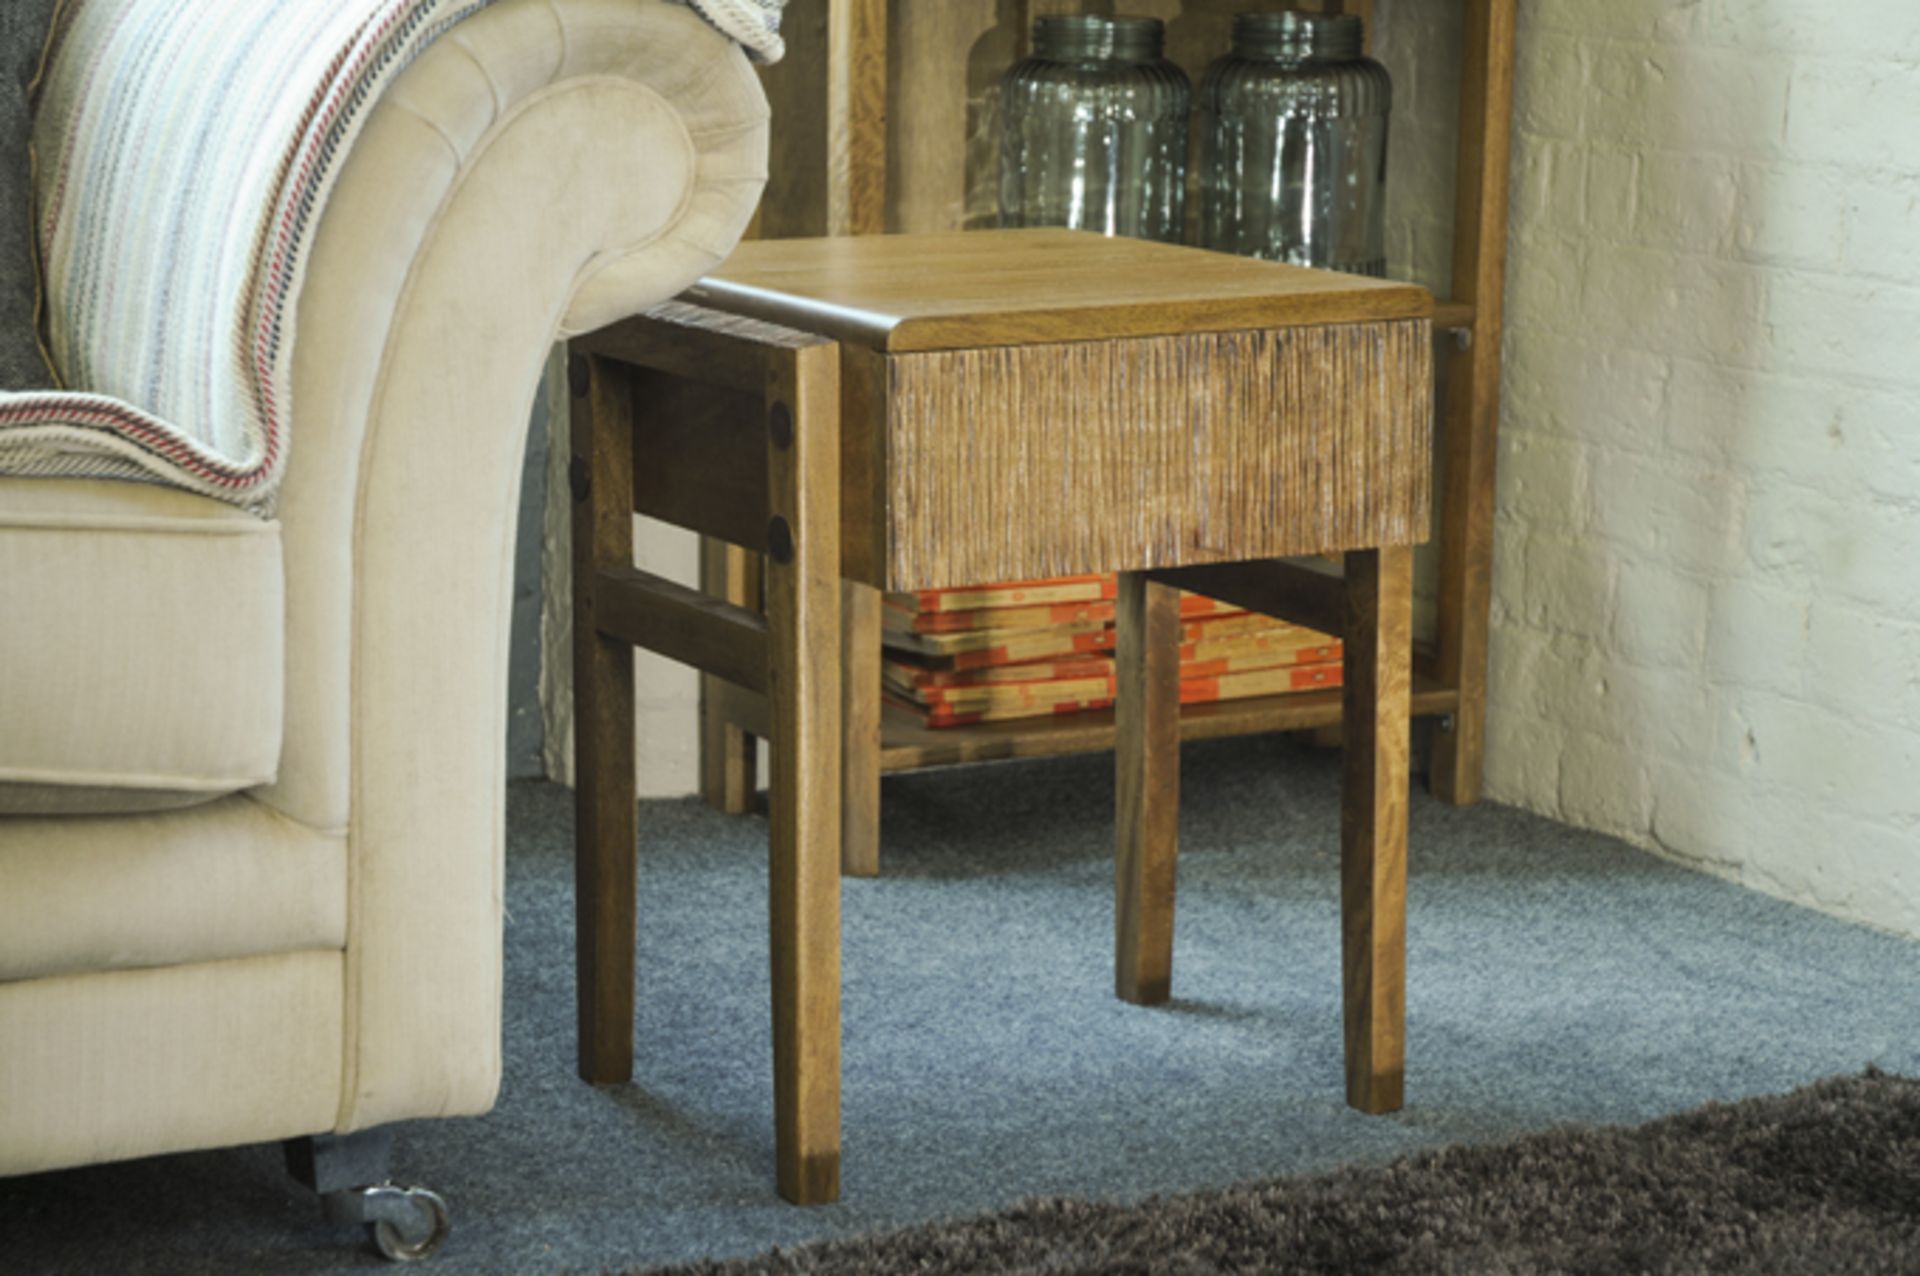 A Pair Of Ripple Side Table / Bedside Tables The Ripple Range Brings Wonderfully Unique Character To